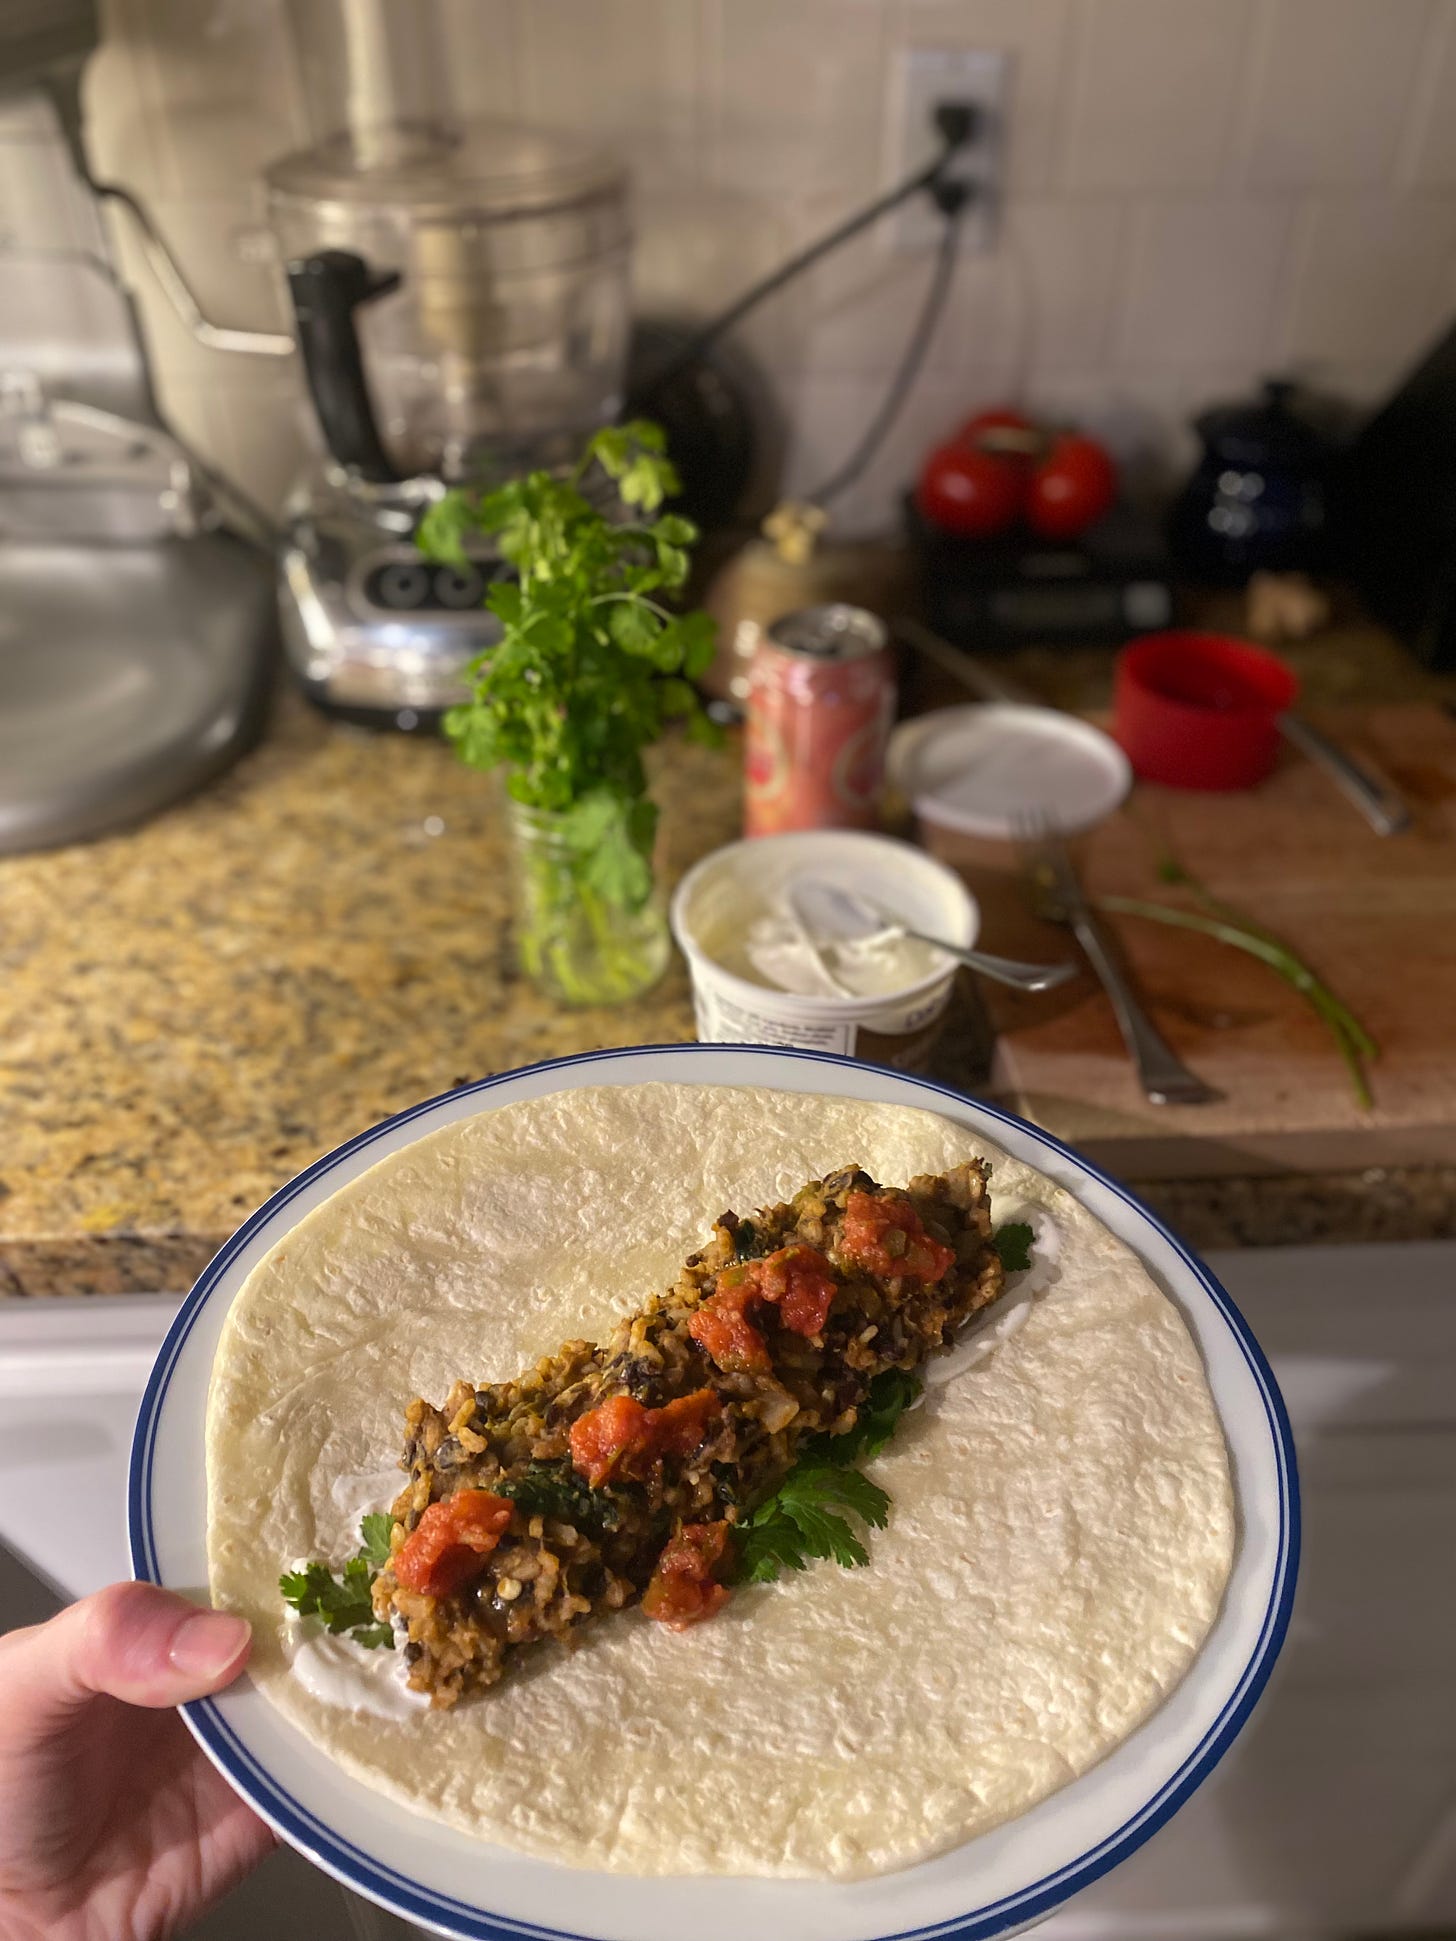 A plate with the burrito filling described above, on top of sour cream and cilantro, with salsa on top. On the counter in the background is a jar with fresh cilantro in it, and containers of the sour cream and salsa.